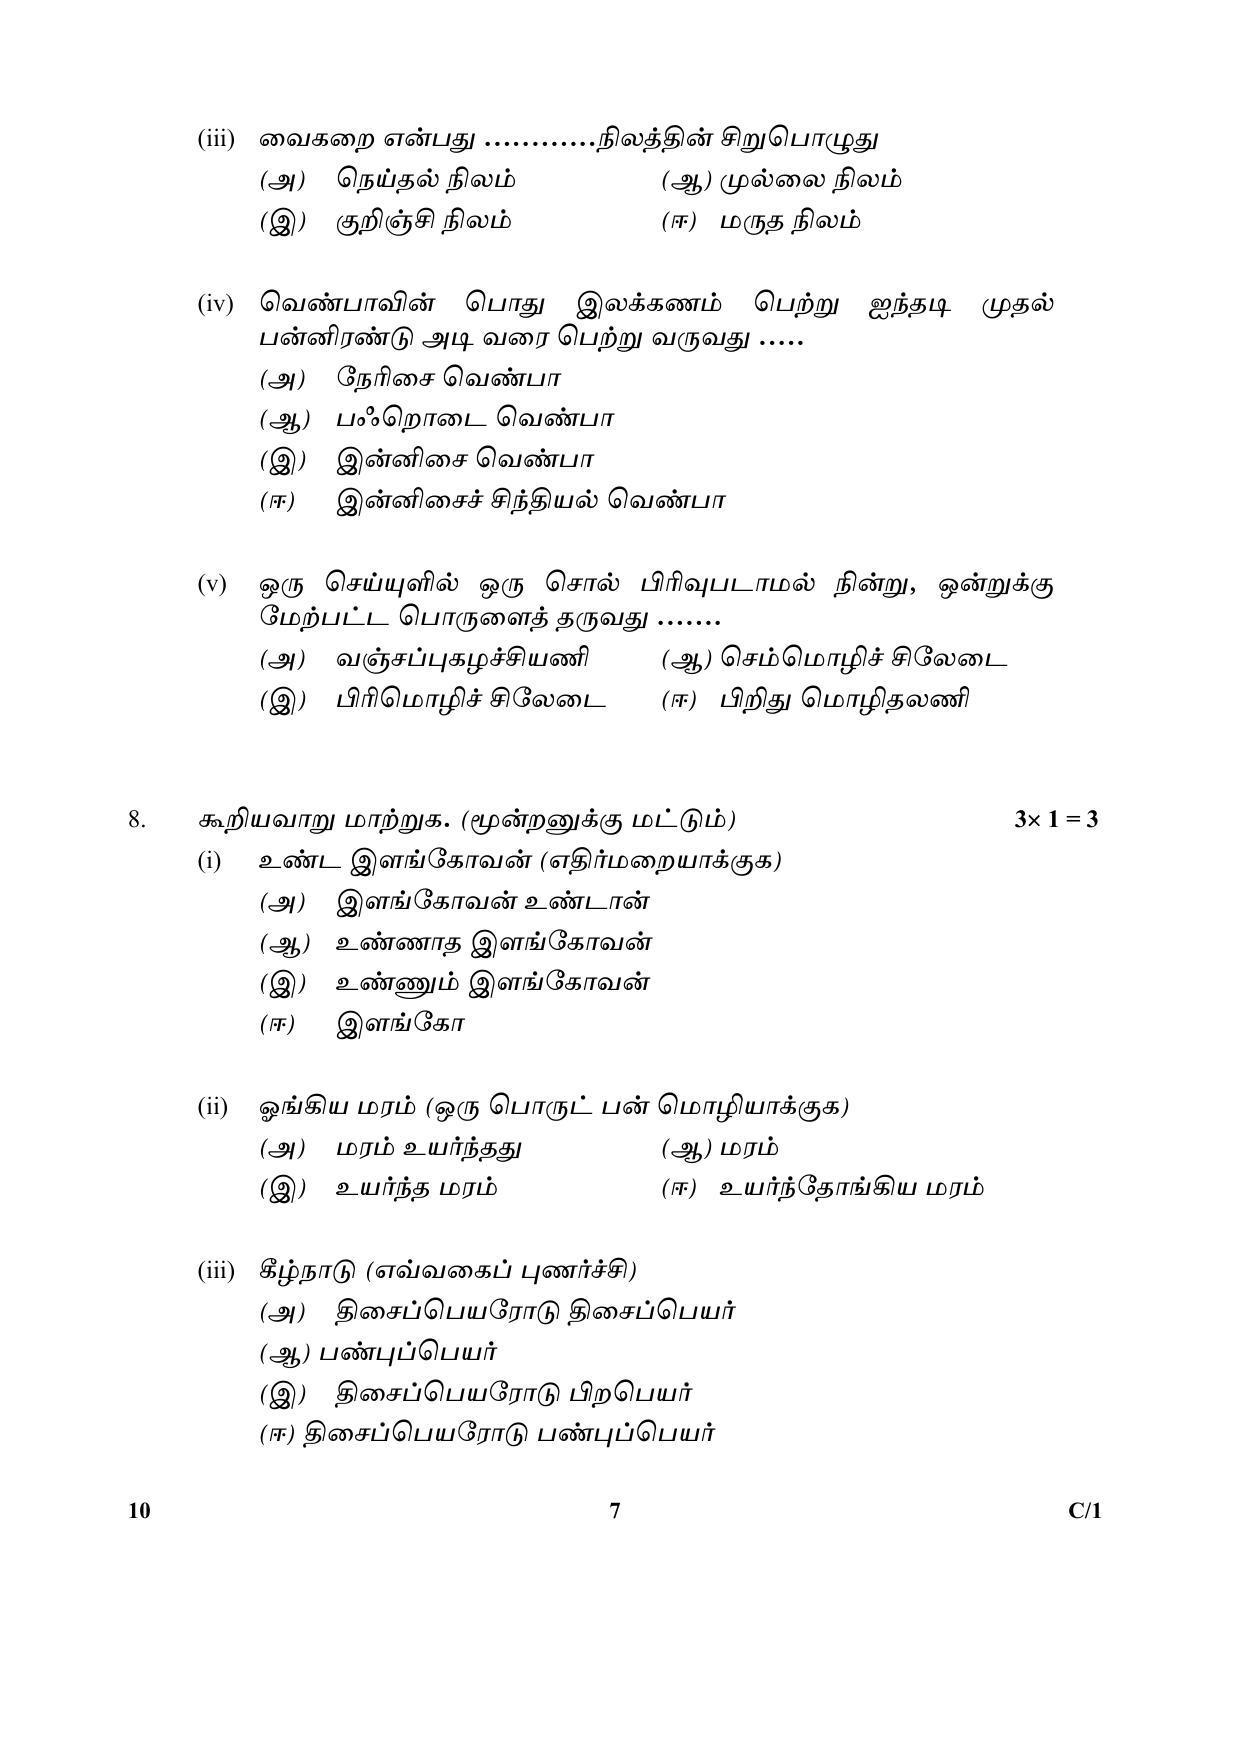 CBSE Class 10 10 (Tamil) 2018 Compartment Question Paper - Page 7